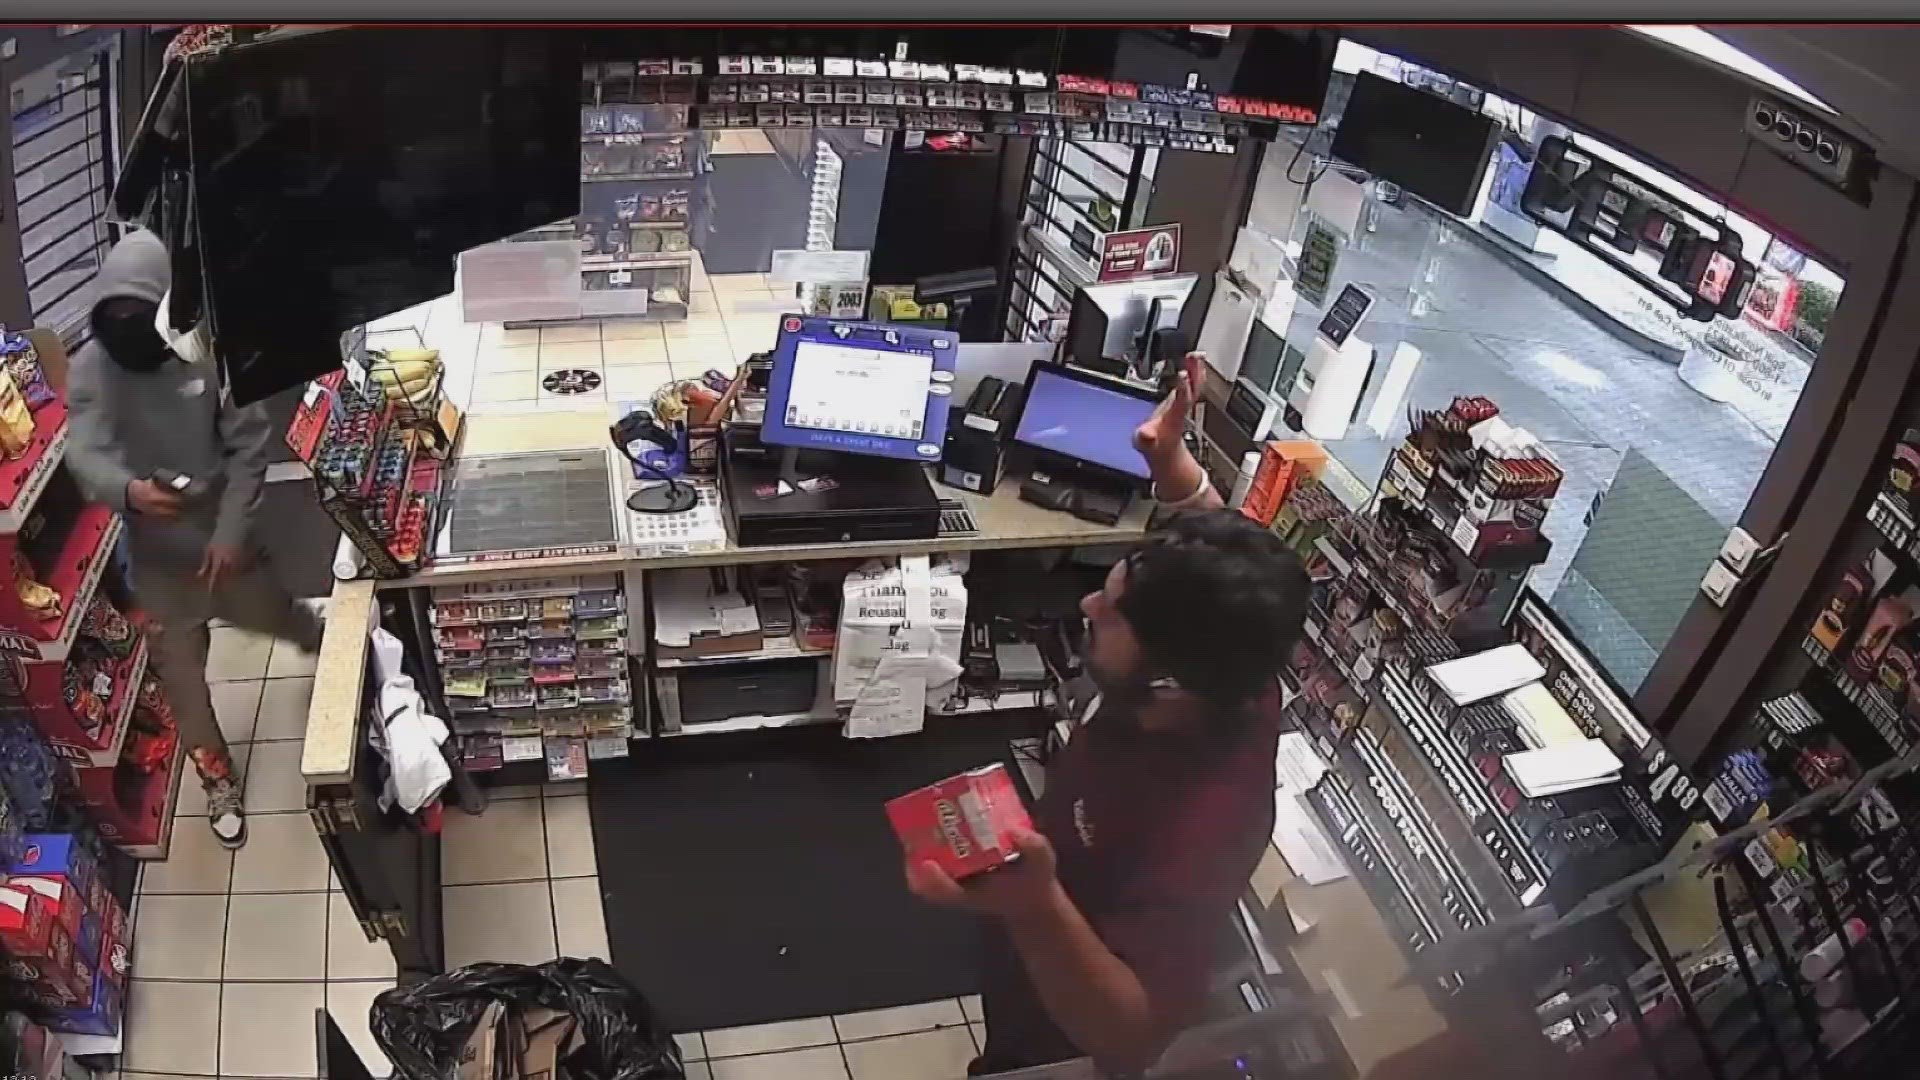 The Sacramento Police Department said the gas station has been robbed four times since Dec. 21.